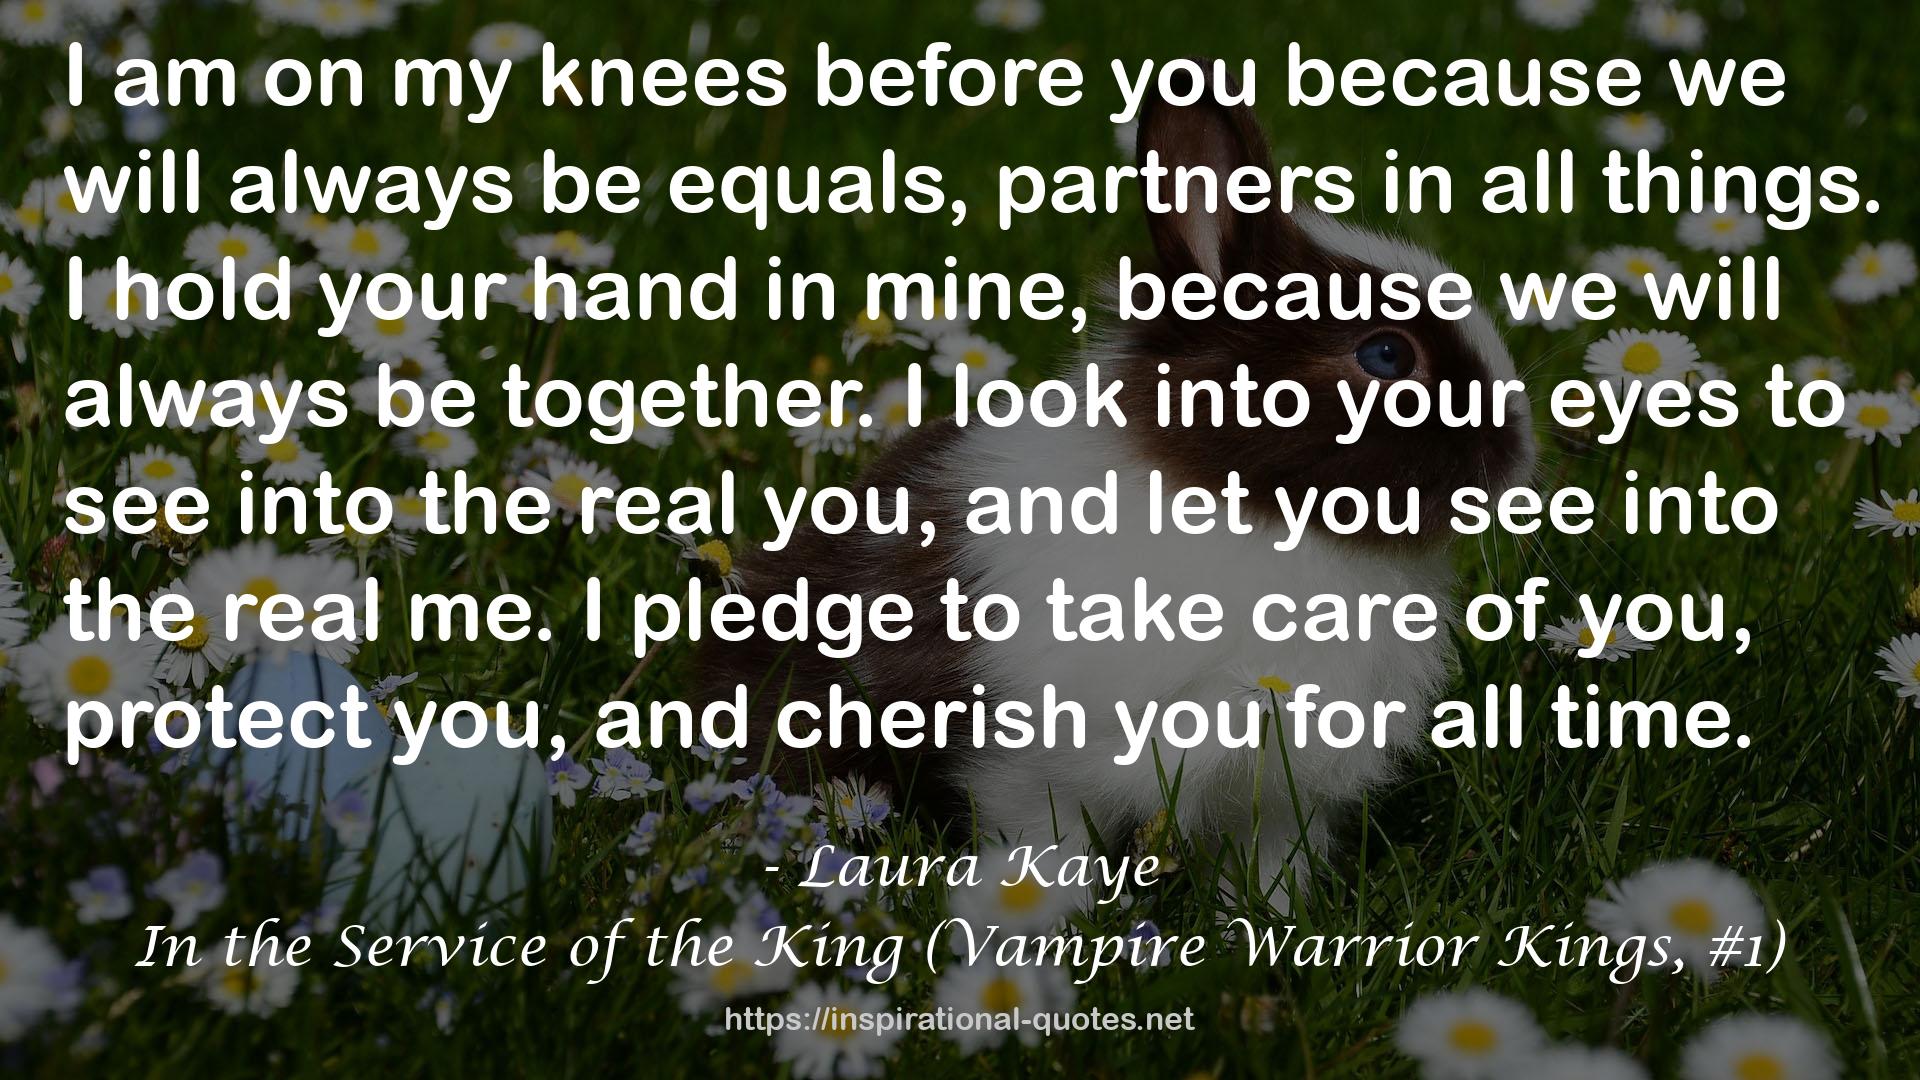 In the Service of the King (Vampire Warrior Kings, #1) QUOTES